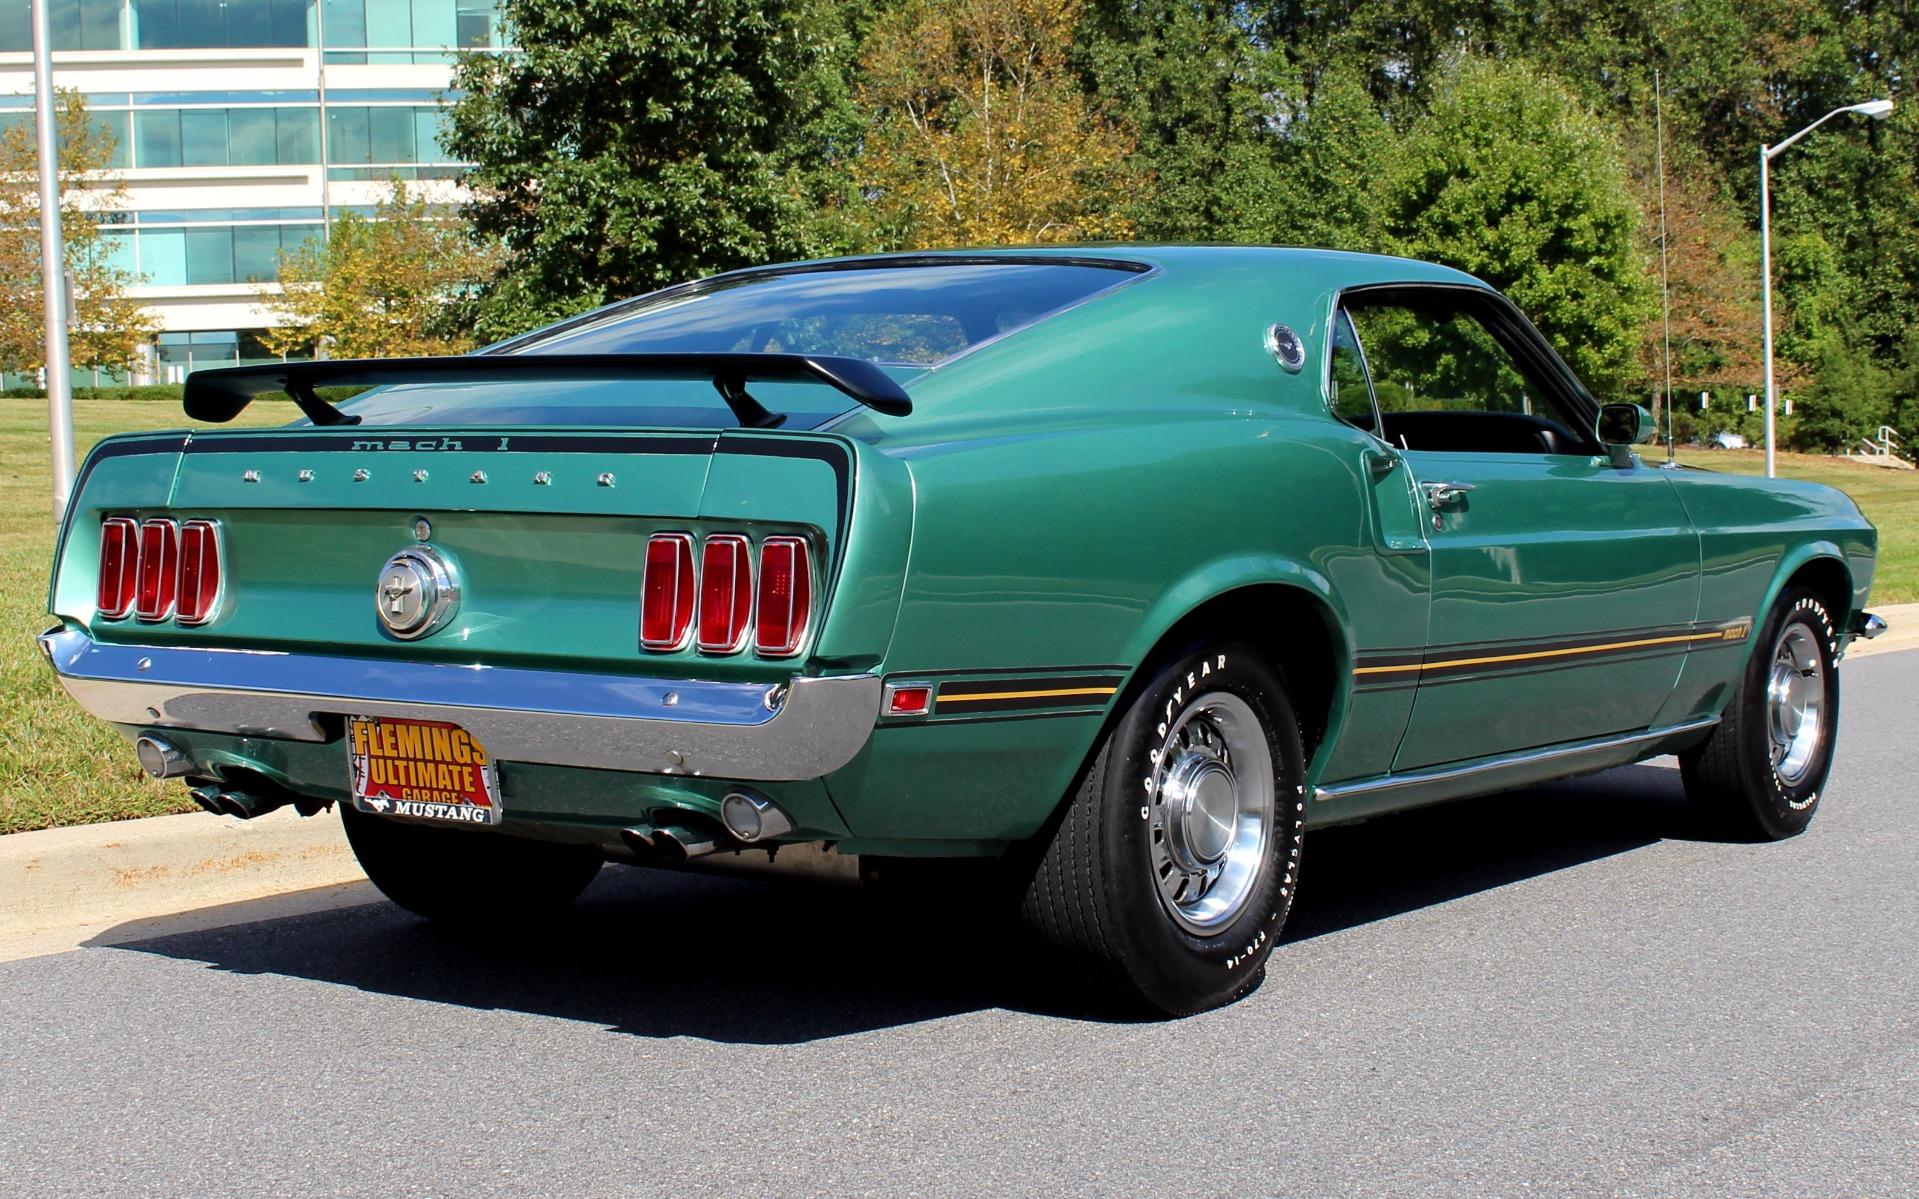 1969 Ford Mustang Mach 1 for sale - BenzaMotors